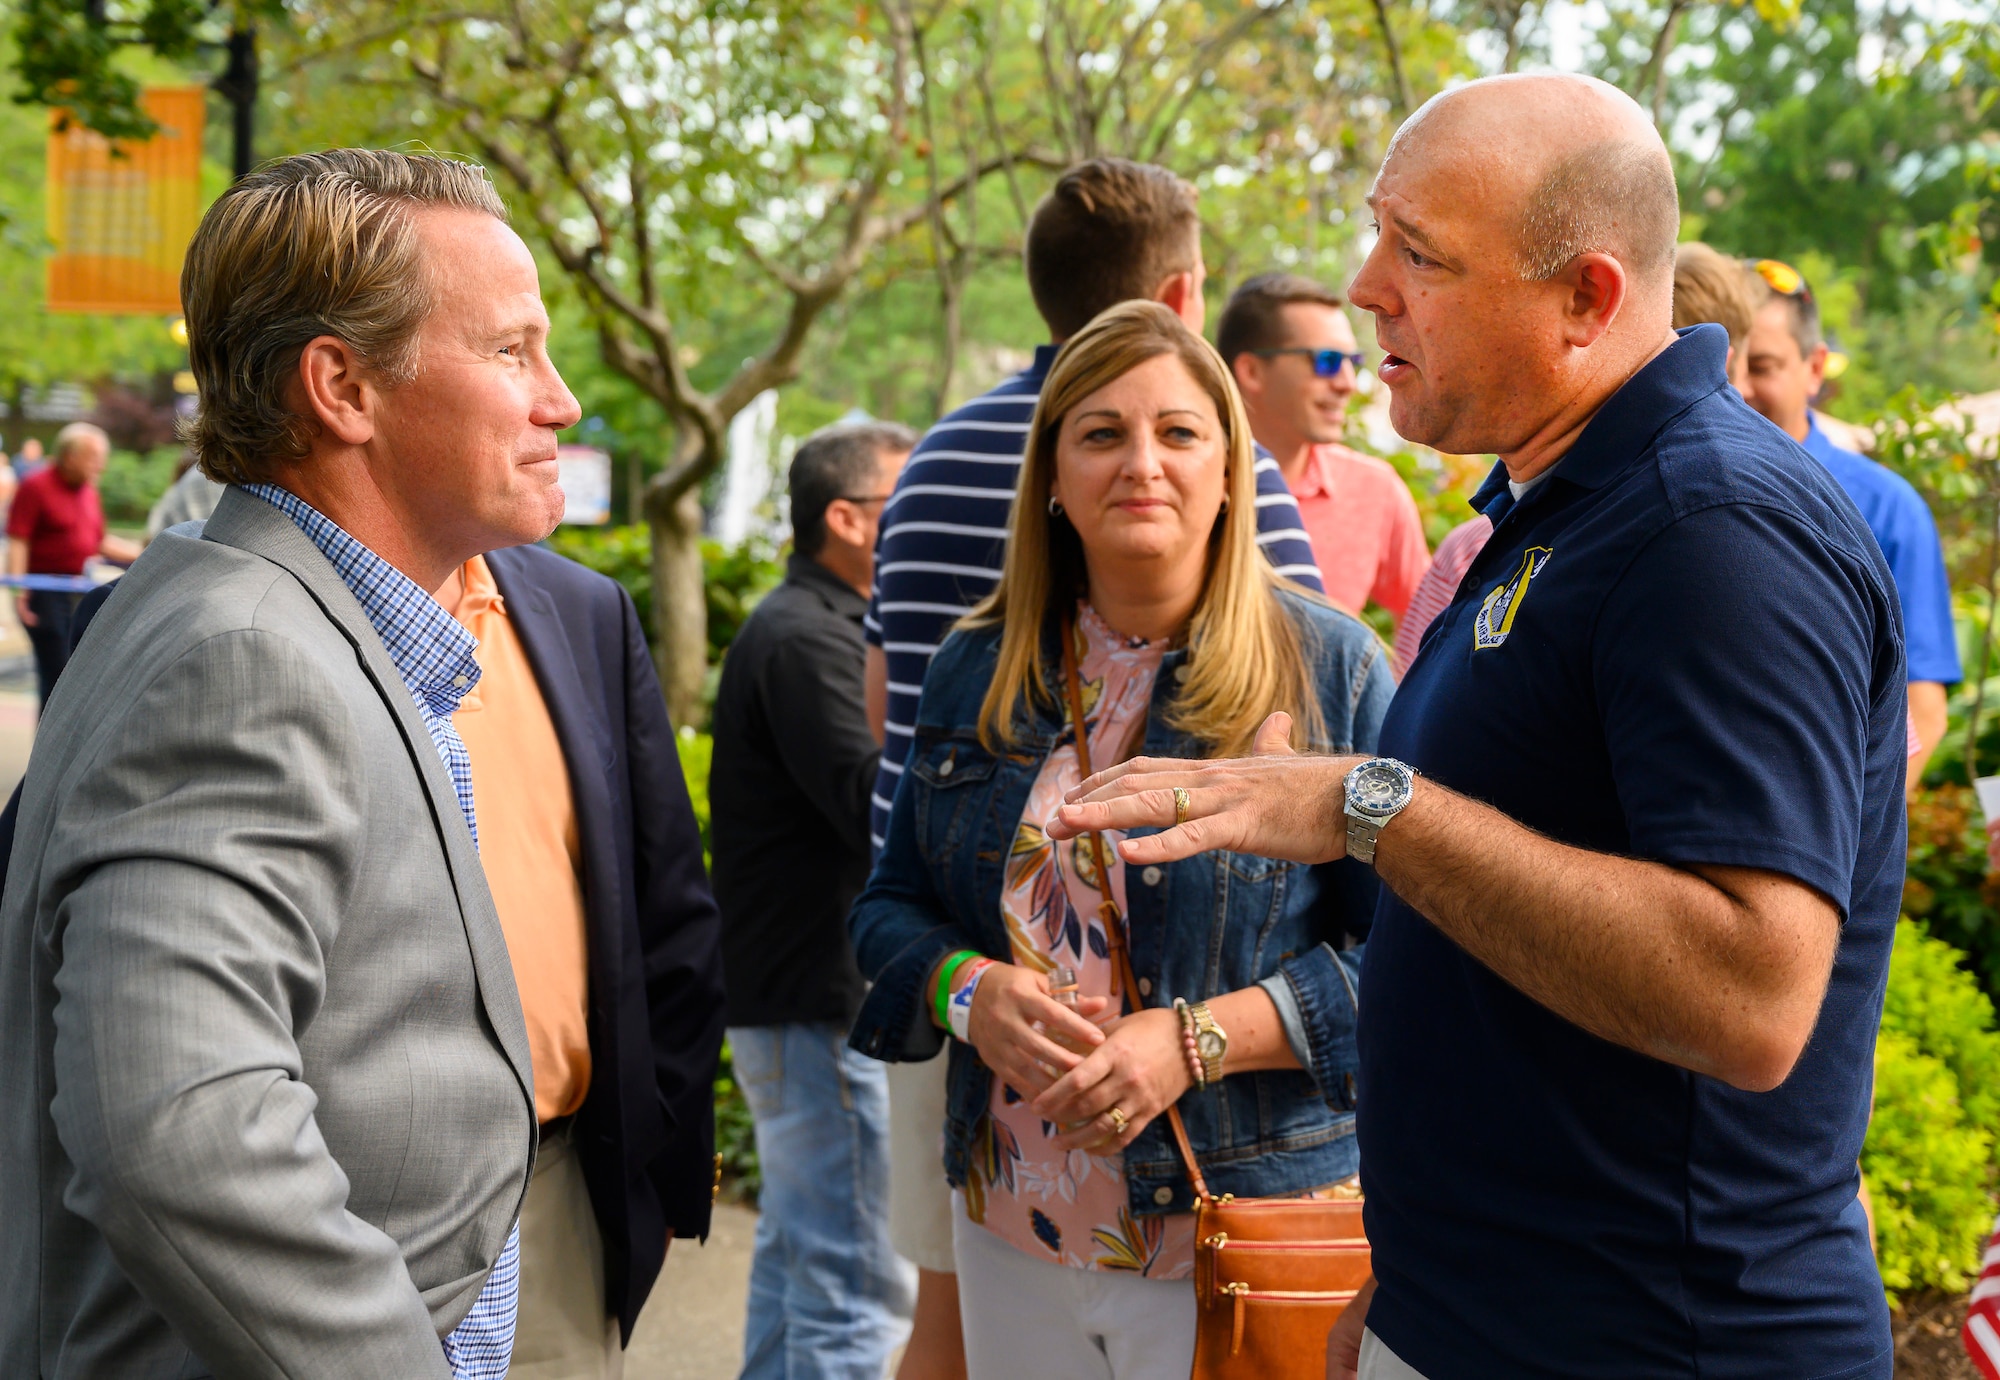 Col. Patrick Miller (right), 88th Air Base Wing and Wright-Patterson Air Force Base commander, alongside his wife, Beth, visits with Ohio Lt. Gov. Jon Husted at a reception prior to the Dayton Development Coalition’s Hometown Heroes event Aug. 5, 2021, at Fraze Pavilion in  Kettering, Ohio. (U.S. Air Force photo by R.J. Oriez)